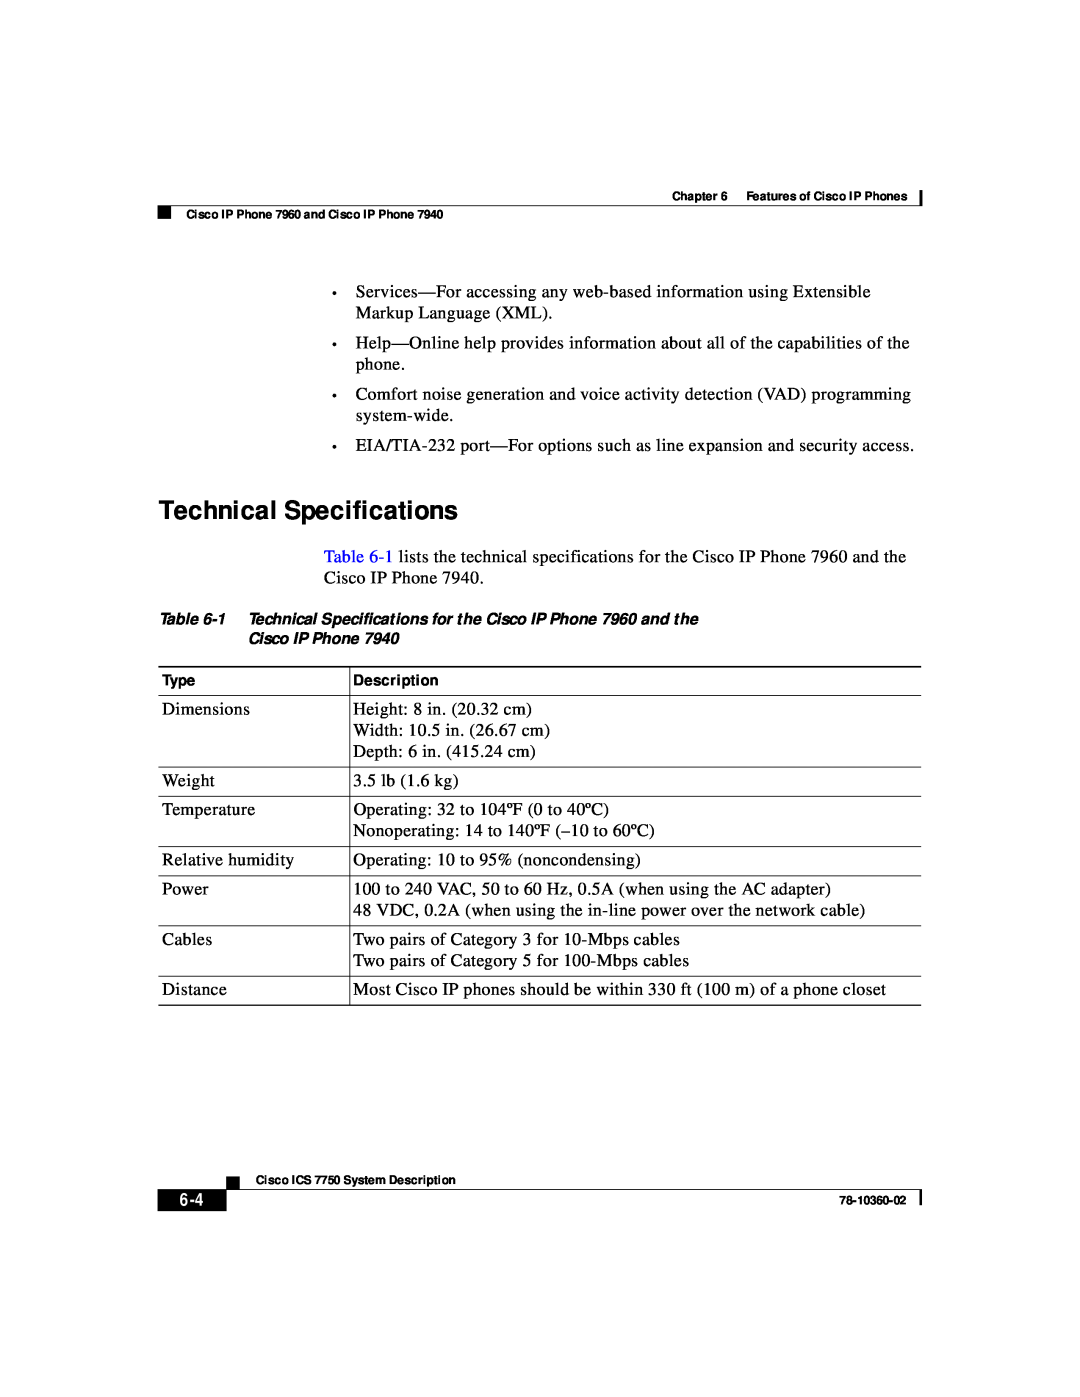 Cisco Systems ICS-7750 manual Technical Specifications, Cisco IP Phone 